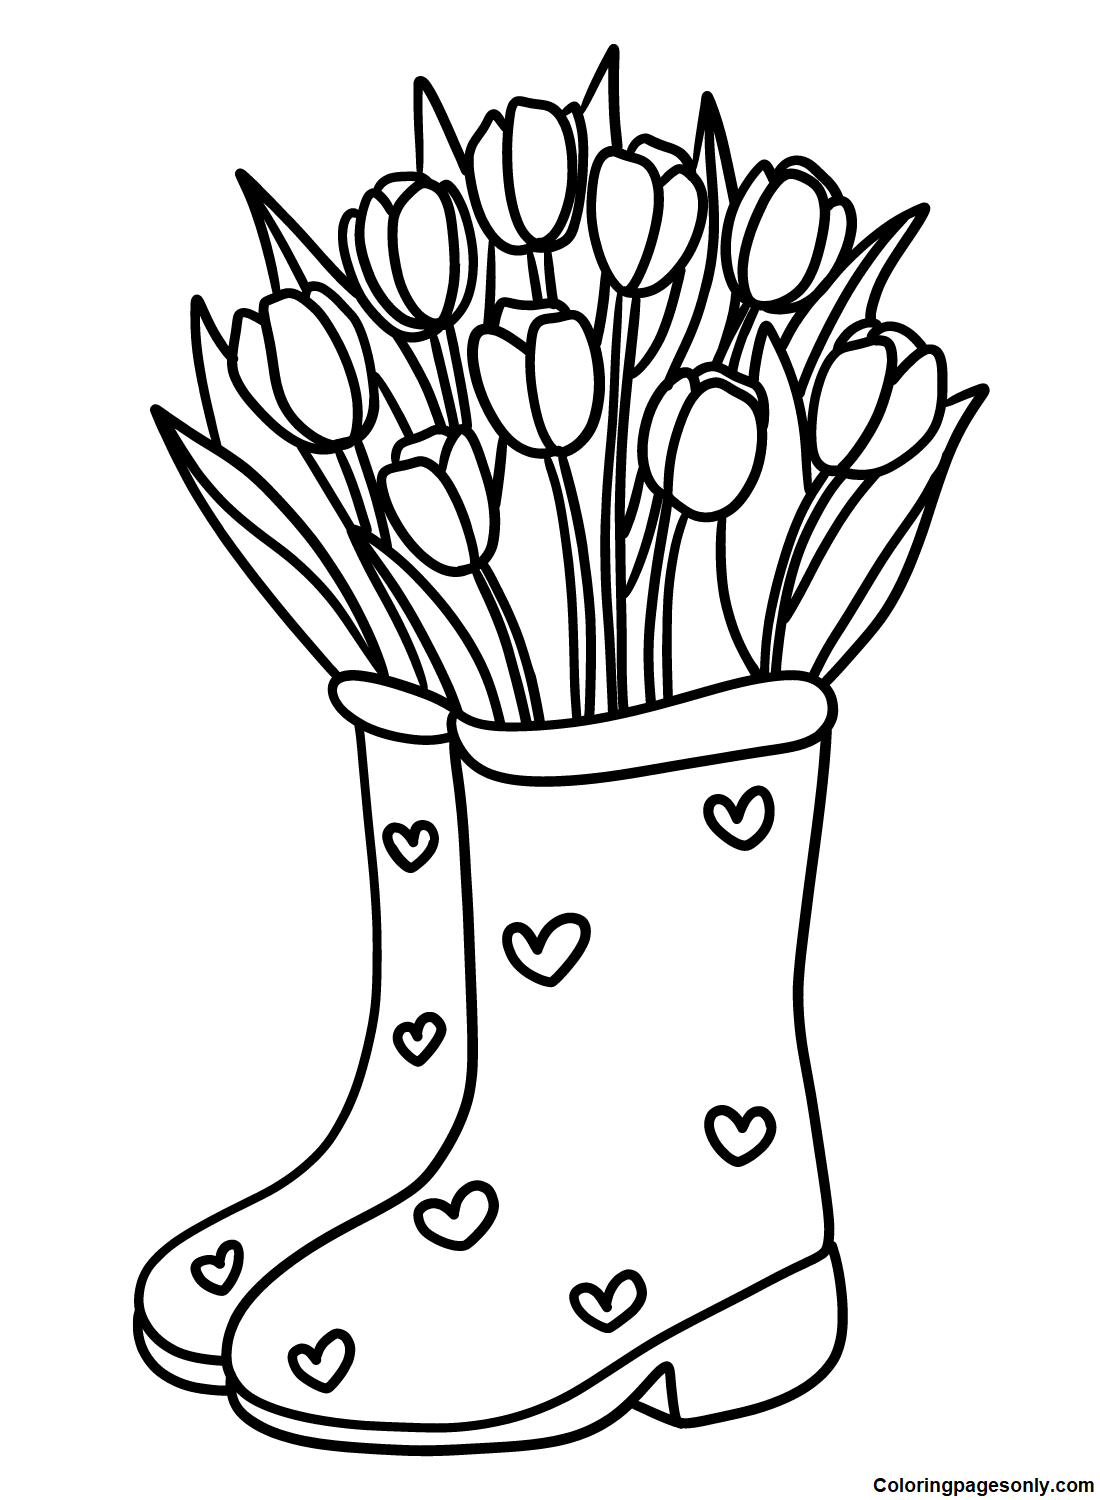 Boots with Tulip Flowers Coloring Page